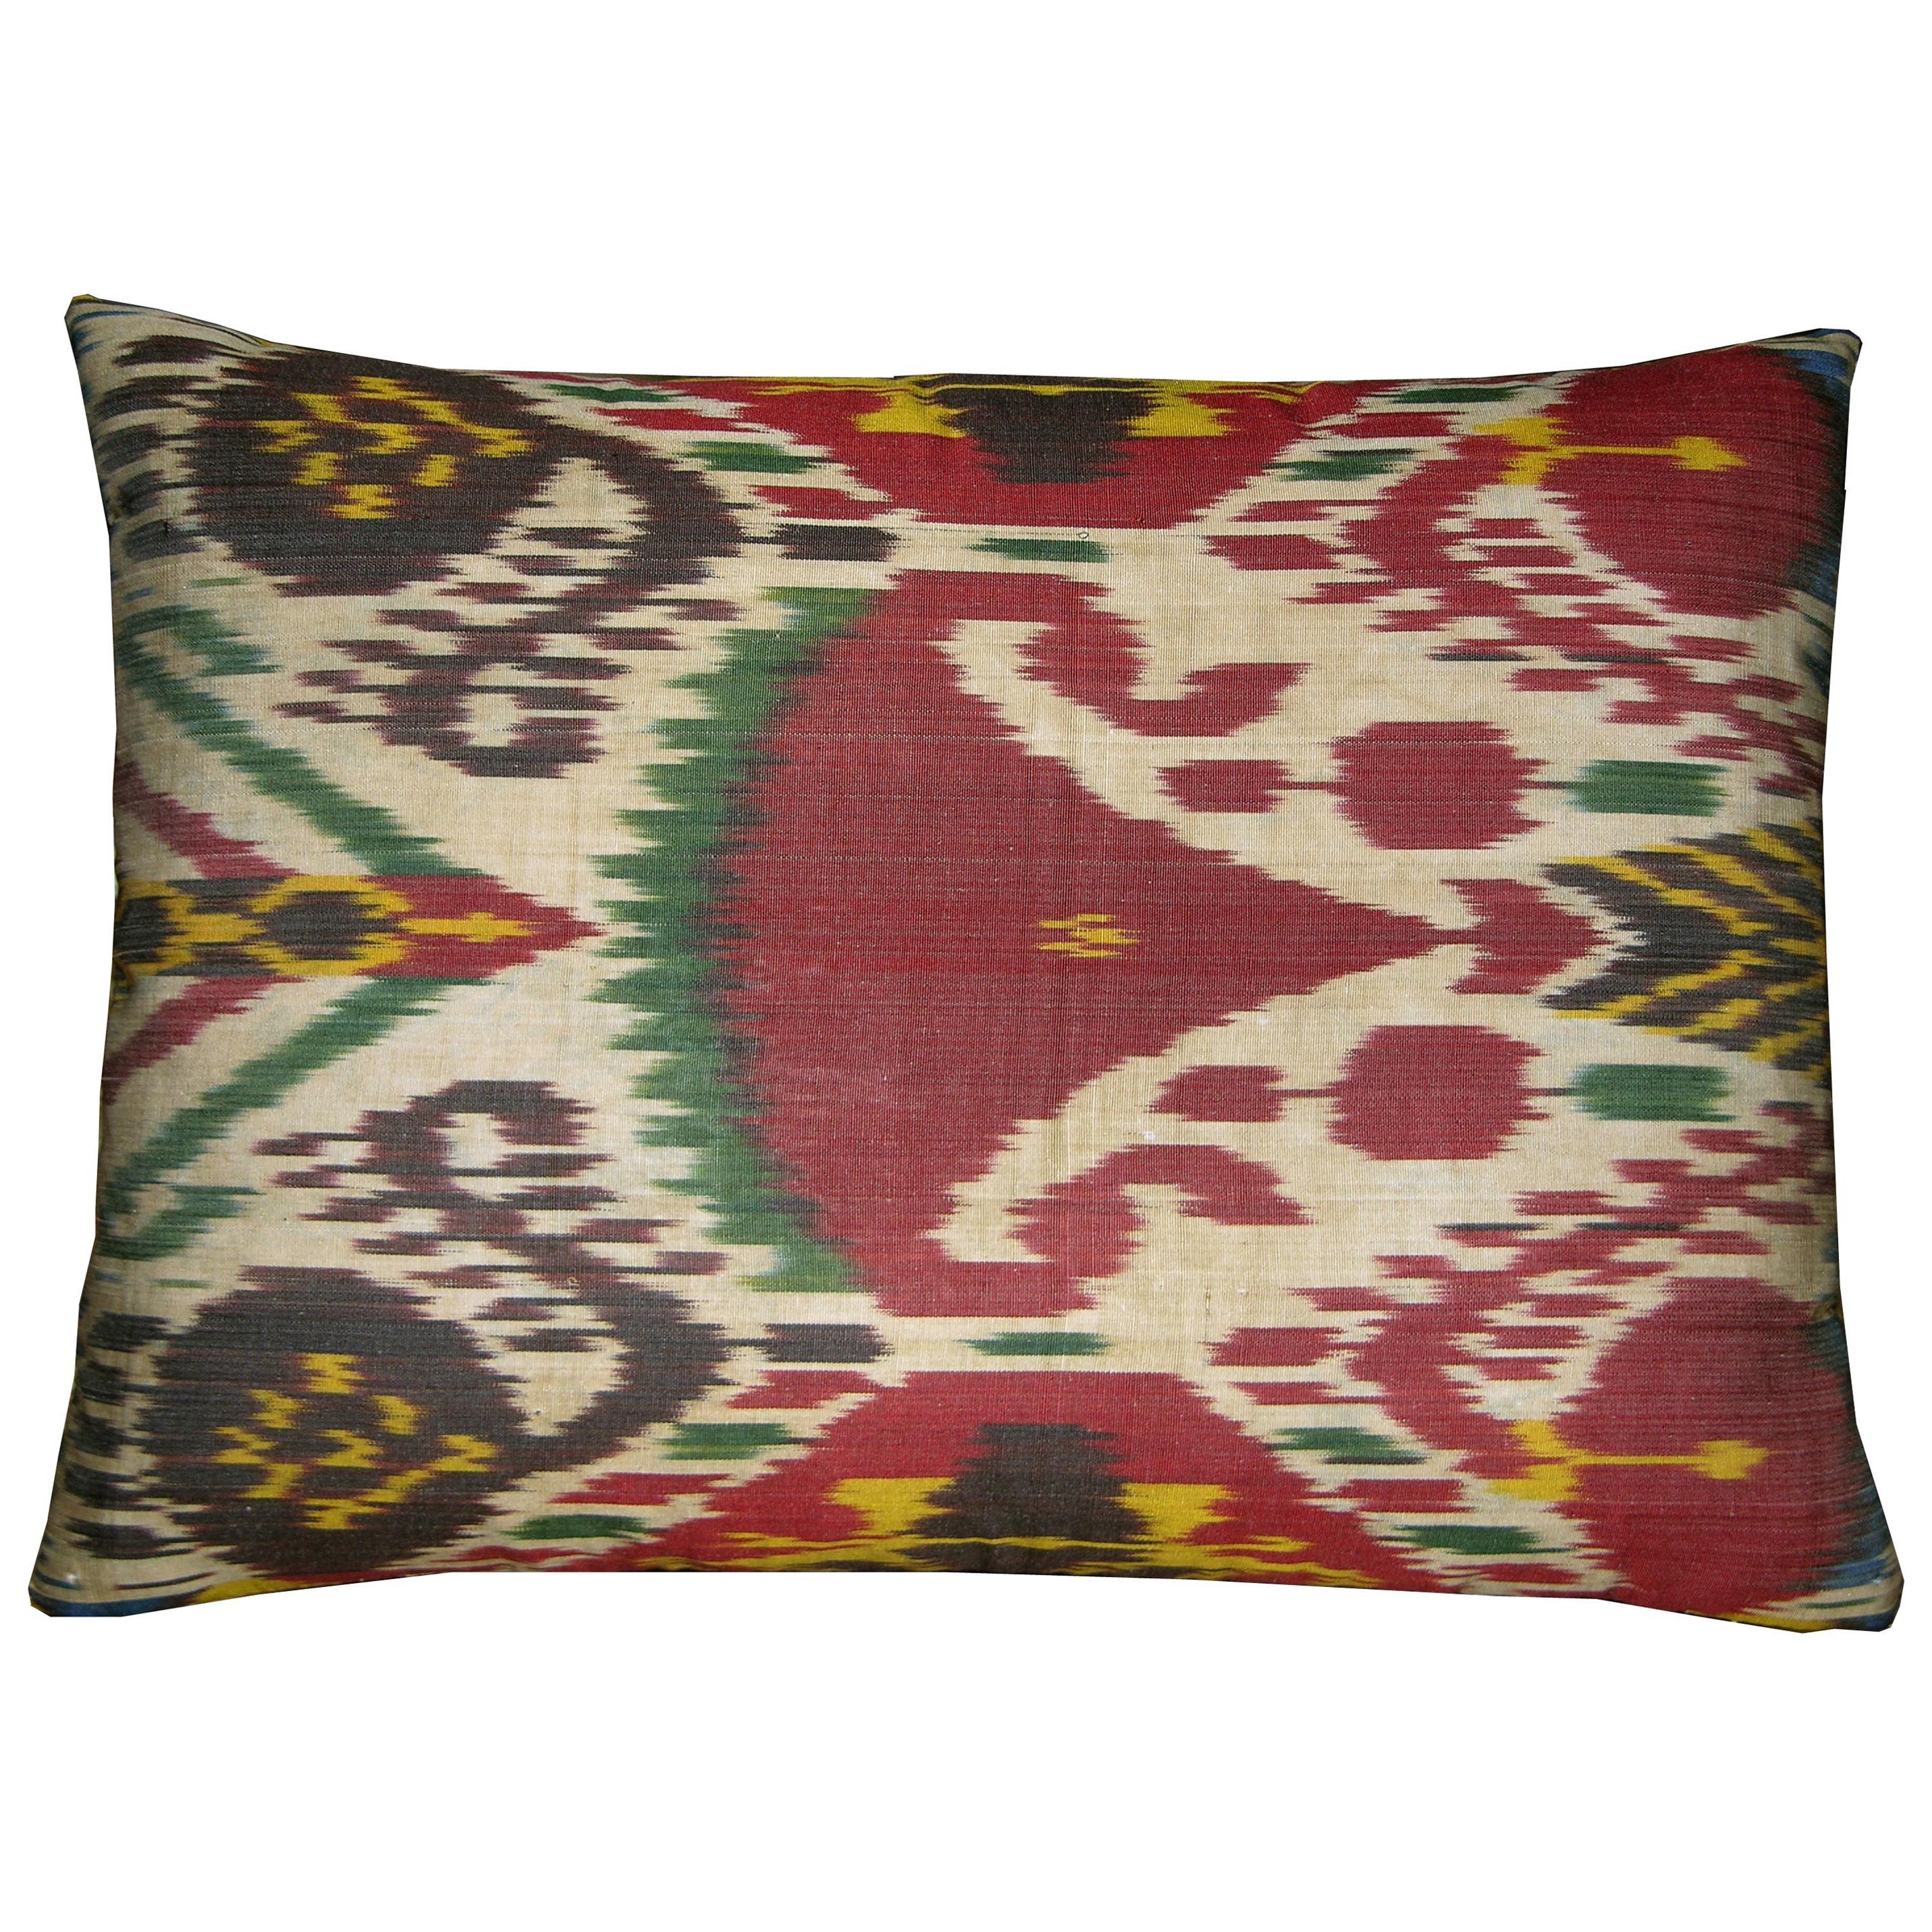 Circa 1900 Antique Ikat Tapestry Pillow For Sale